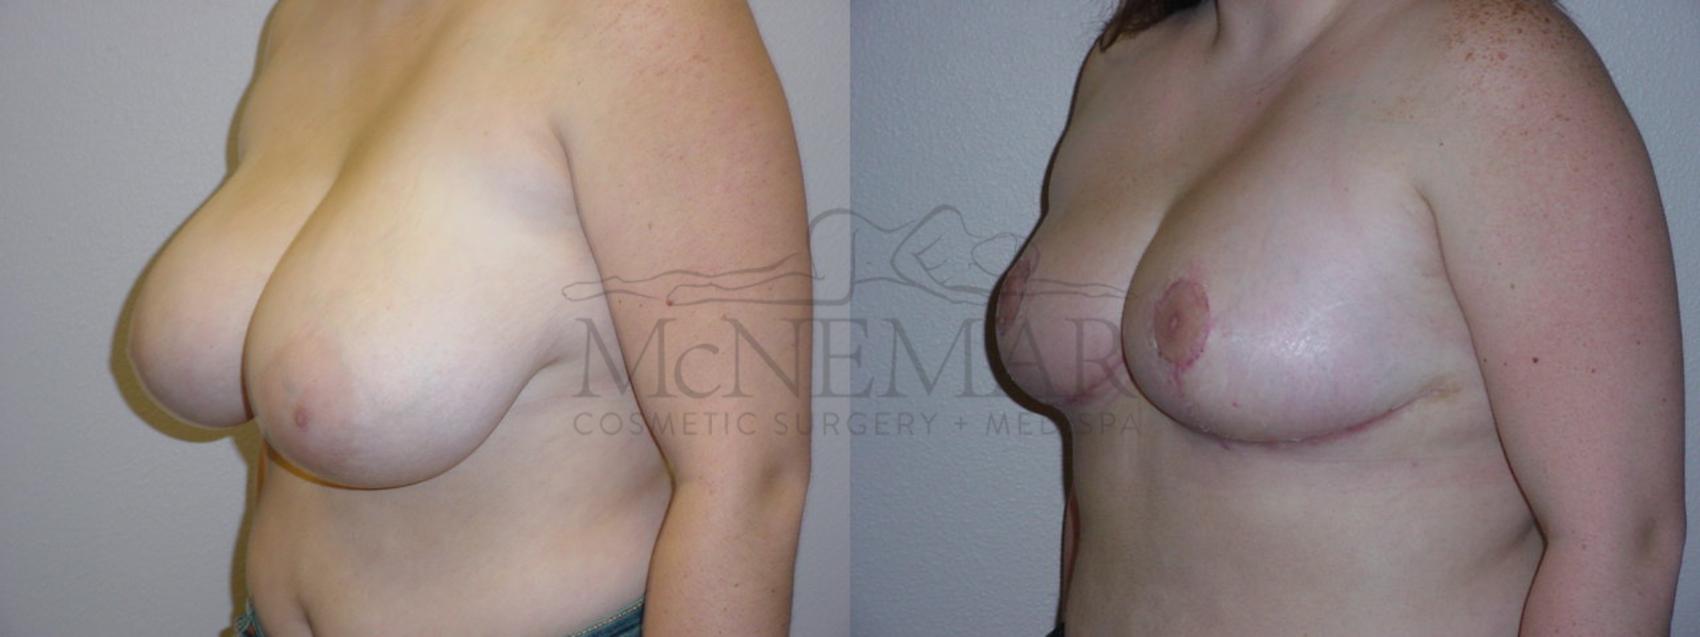 Breast Reduction Case 99 Before & After View #2 | San Ramon & Tracy, CA | McNemar Cosmetic Surgery